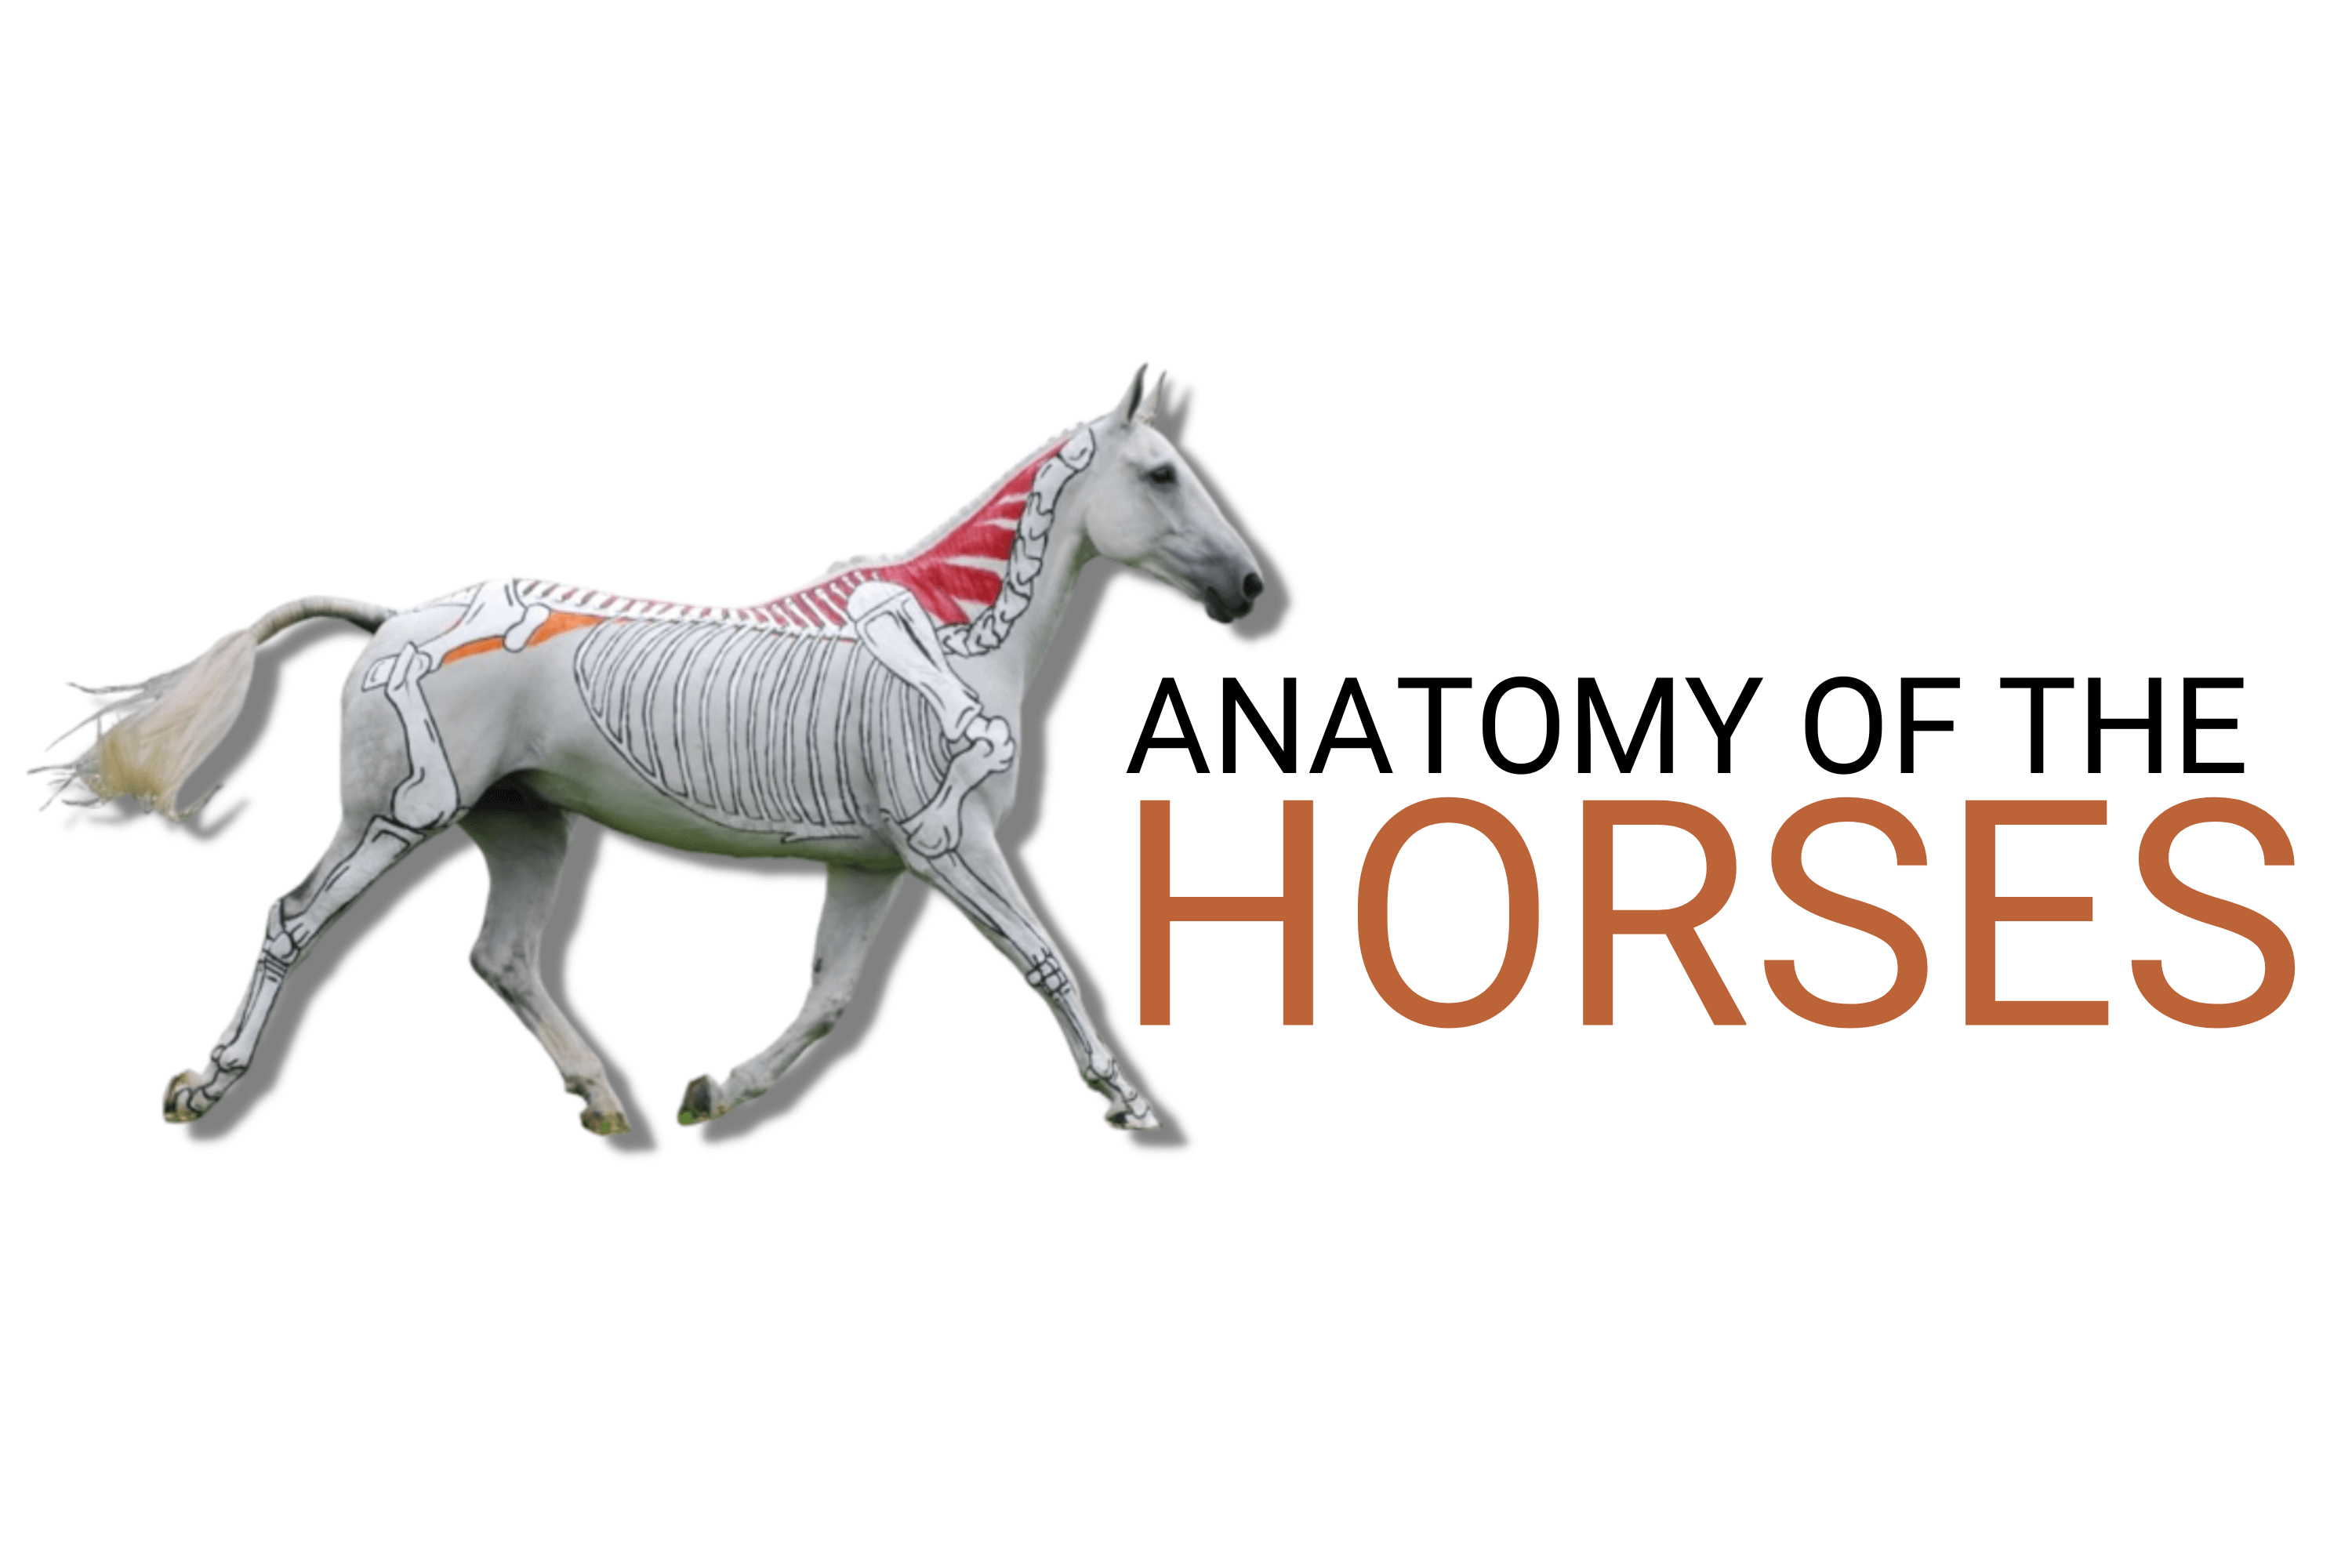 Anatomy of a horse